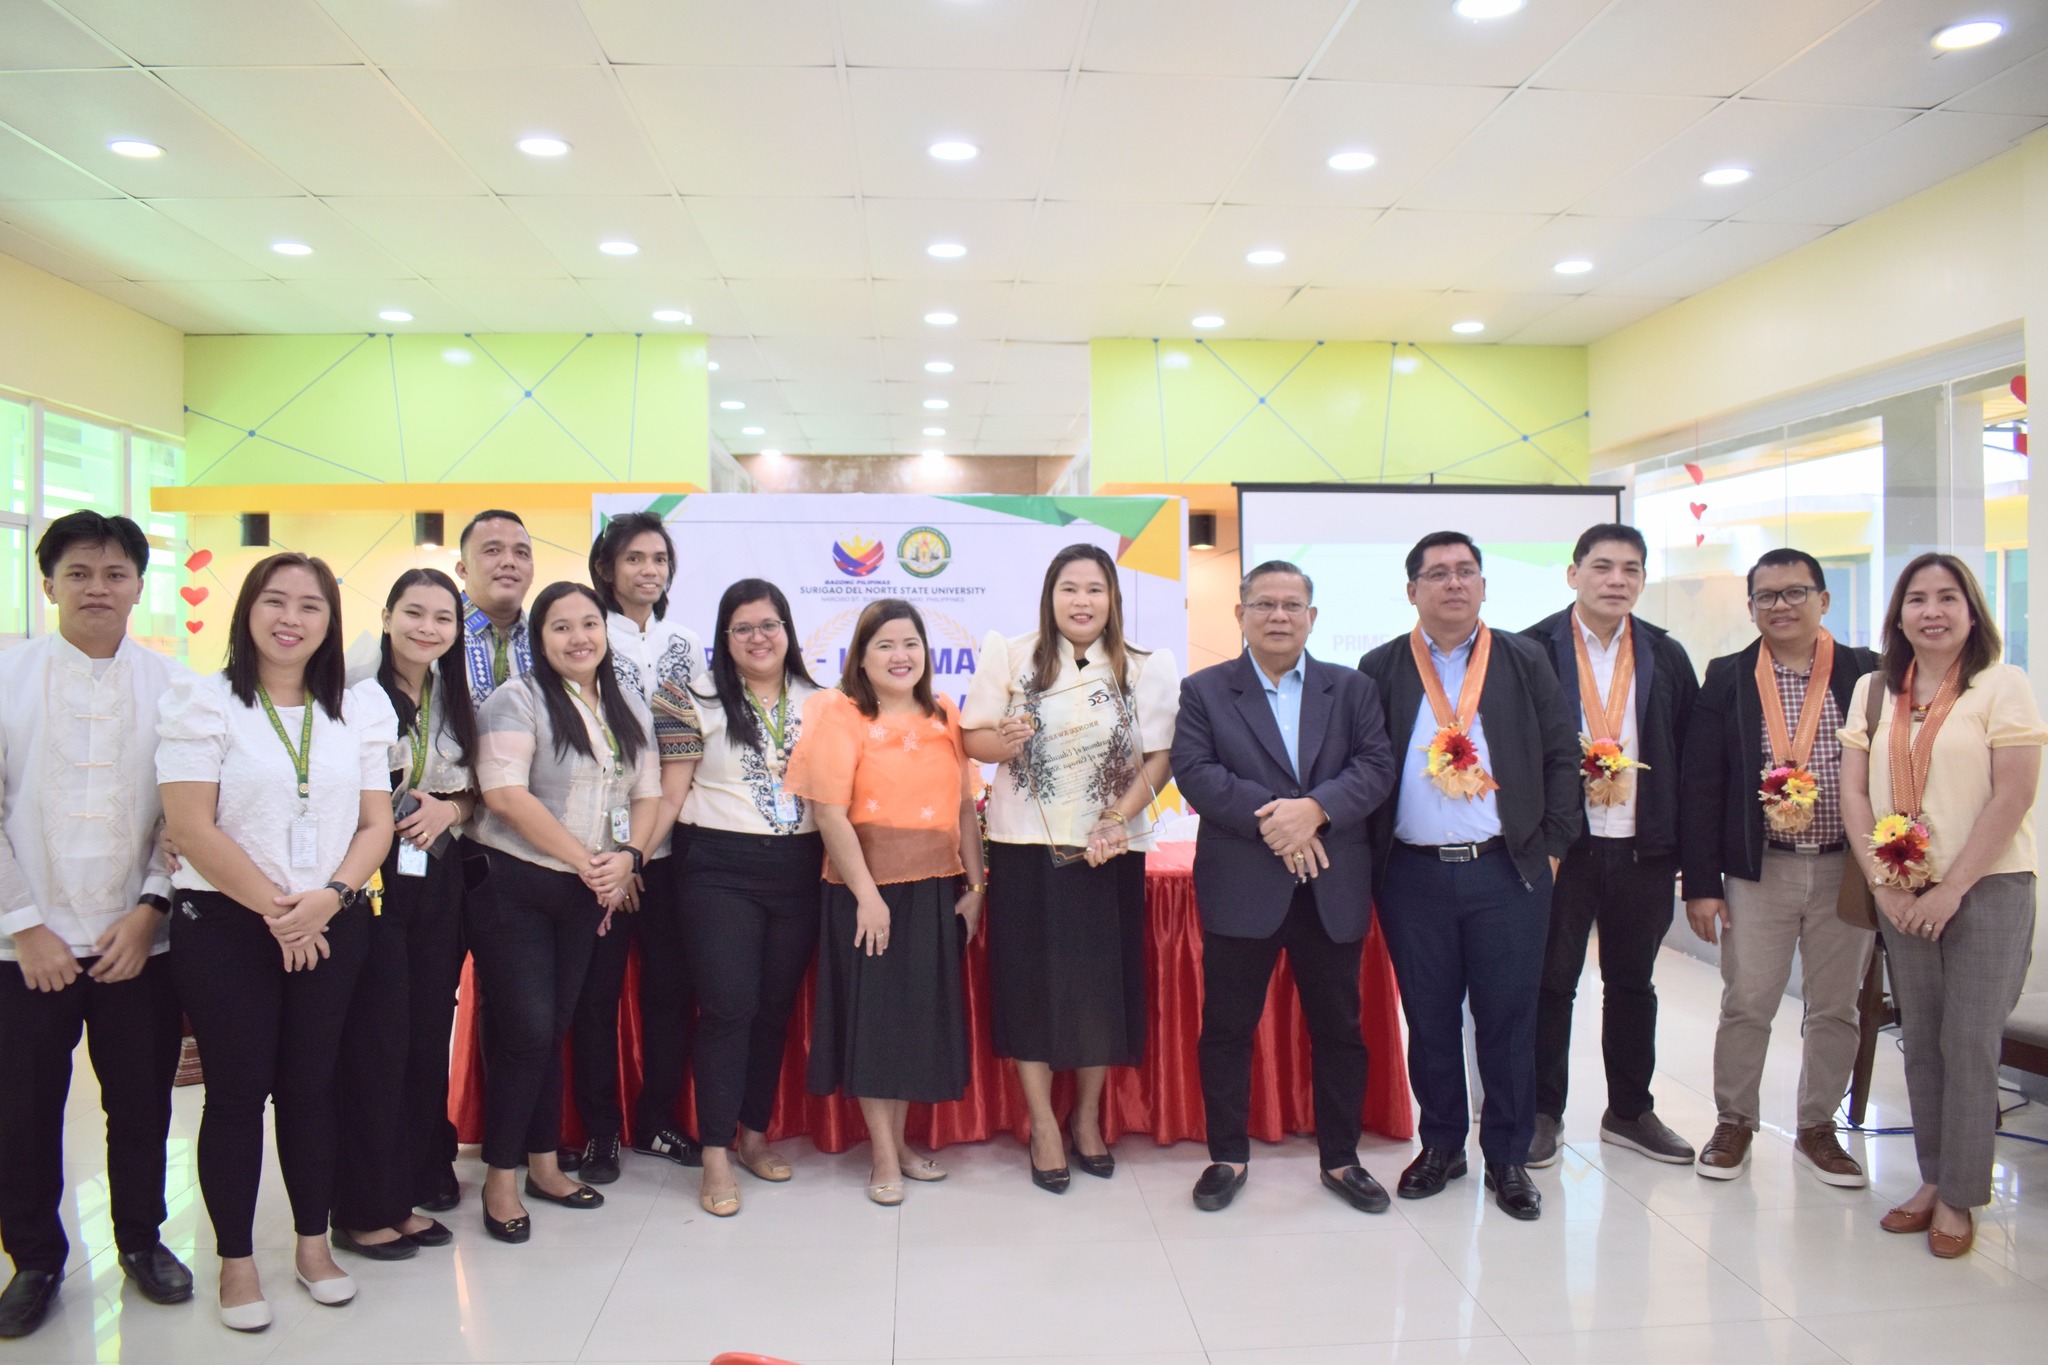 SNSU is the first State University in Caraga to have achieved this prestigious award in pursuit of excellence in Human Resource Management & public service delivery.